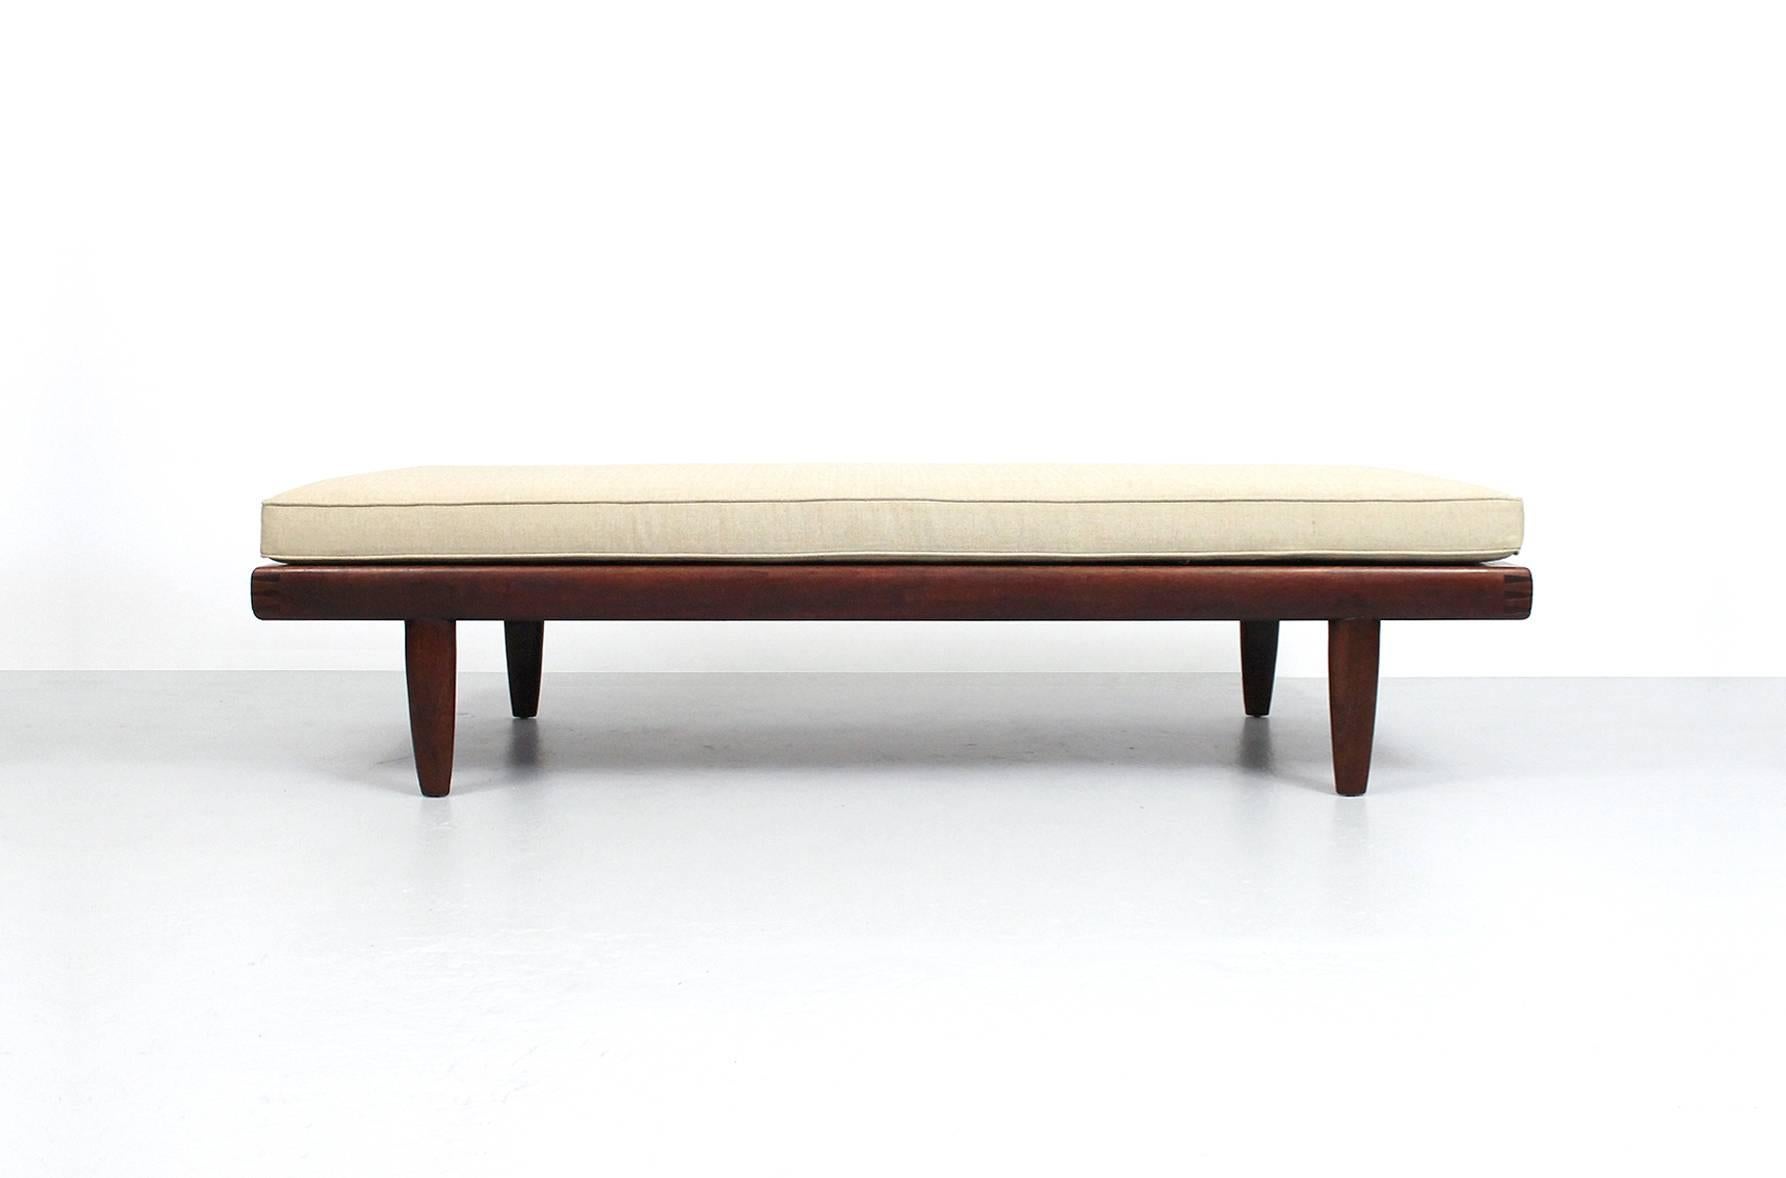 George Nakashima coffee table or daybed with upholstered loose cushion. This piece is from the Sundra line for Widdicomb. Characteristic use of walnut and rosewood with dovetail joinery. Branded to underside.